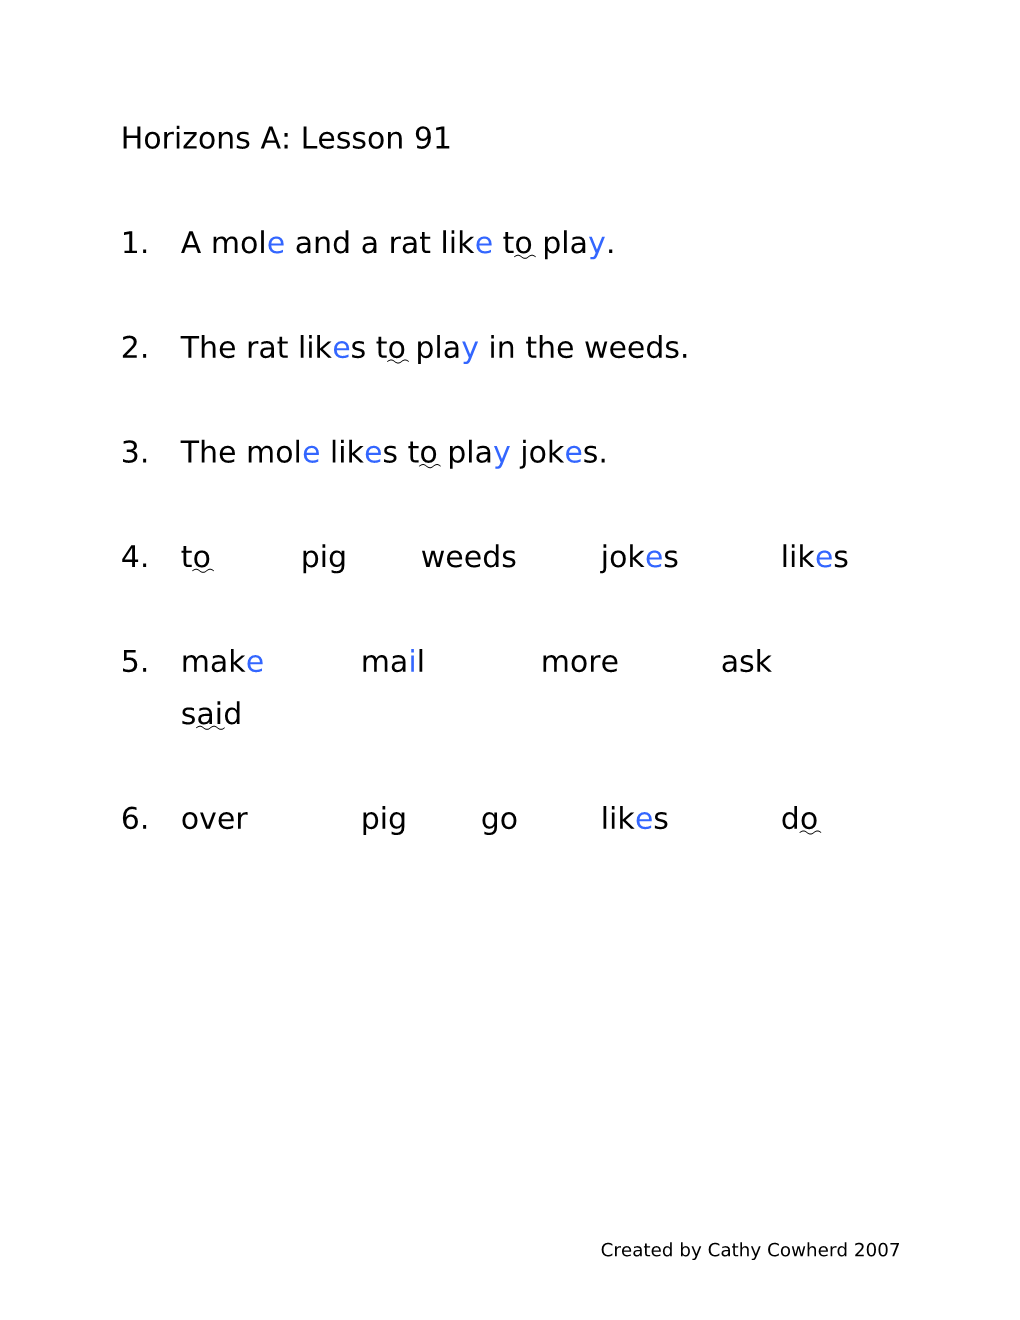 1. a Mole and a Rat Like to Play